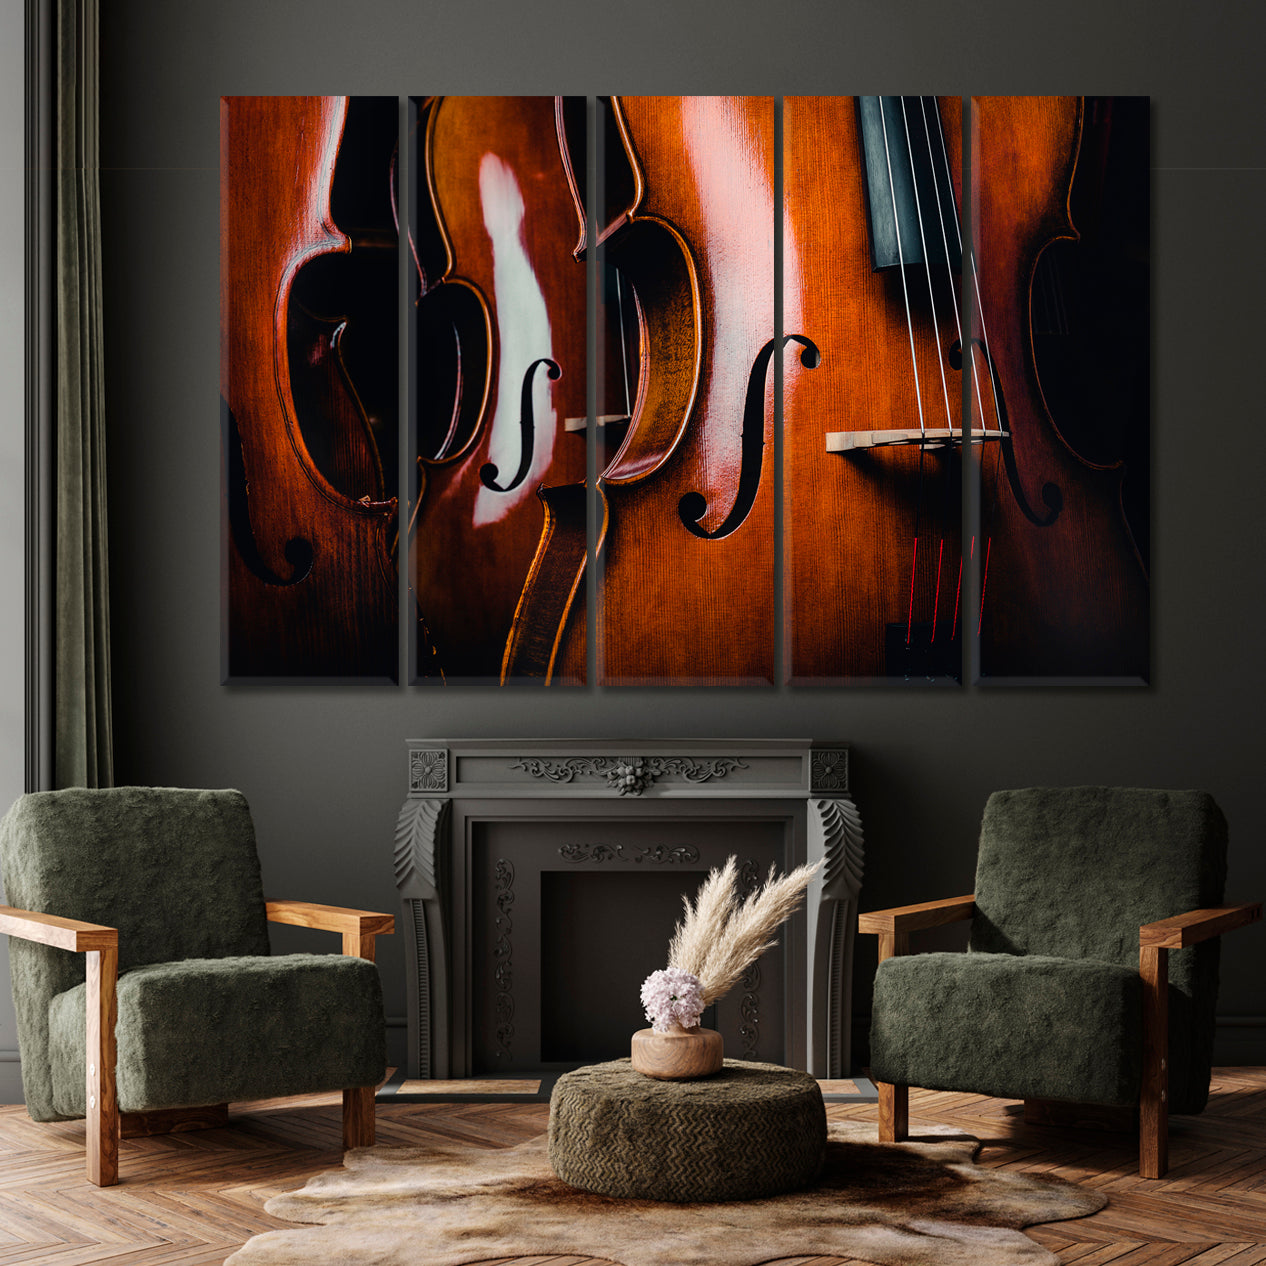 CELLO SYMPHONY Classic Violins Beauty of Music Music Wall Panels Artesty 5 panels 36" x 24" 